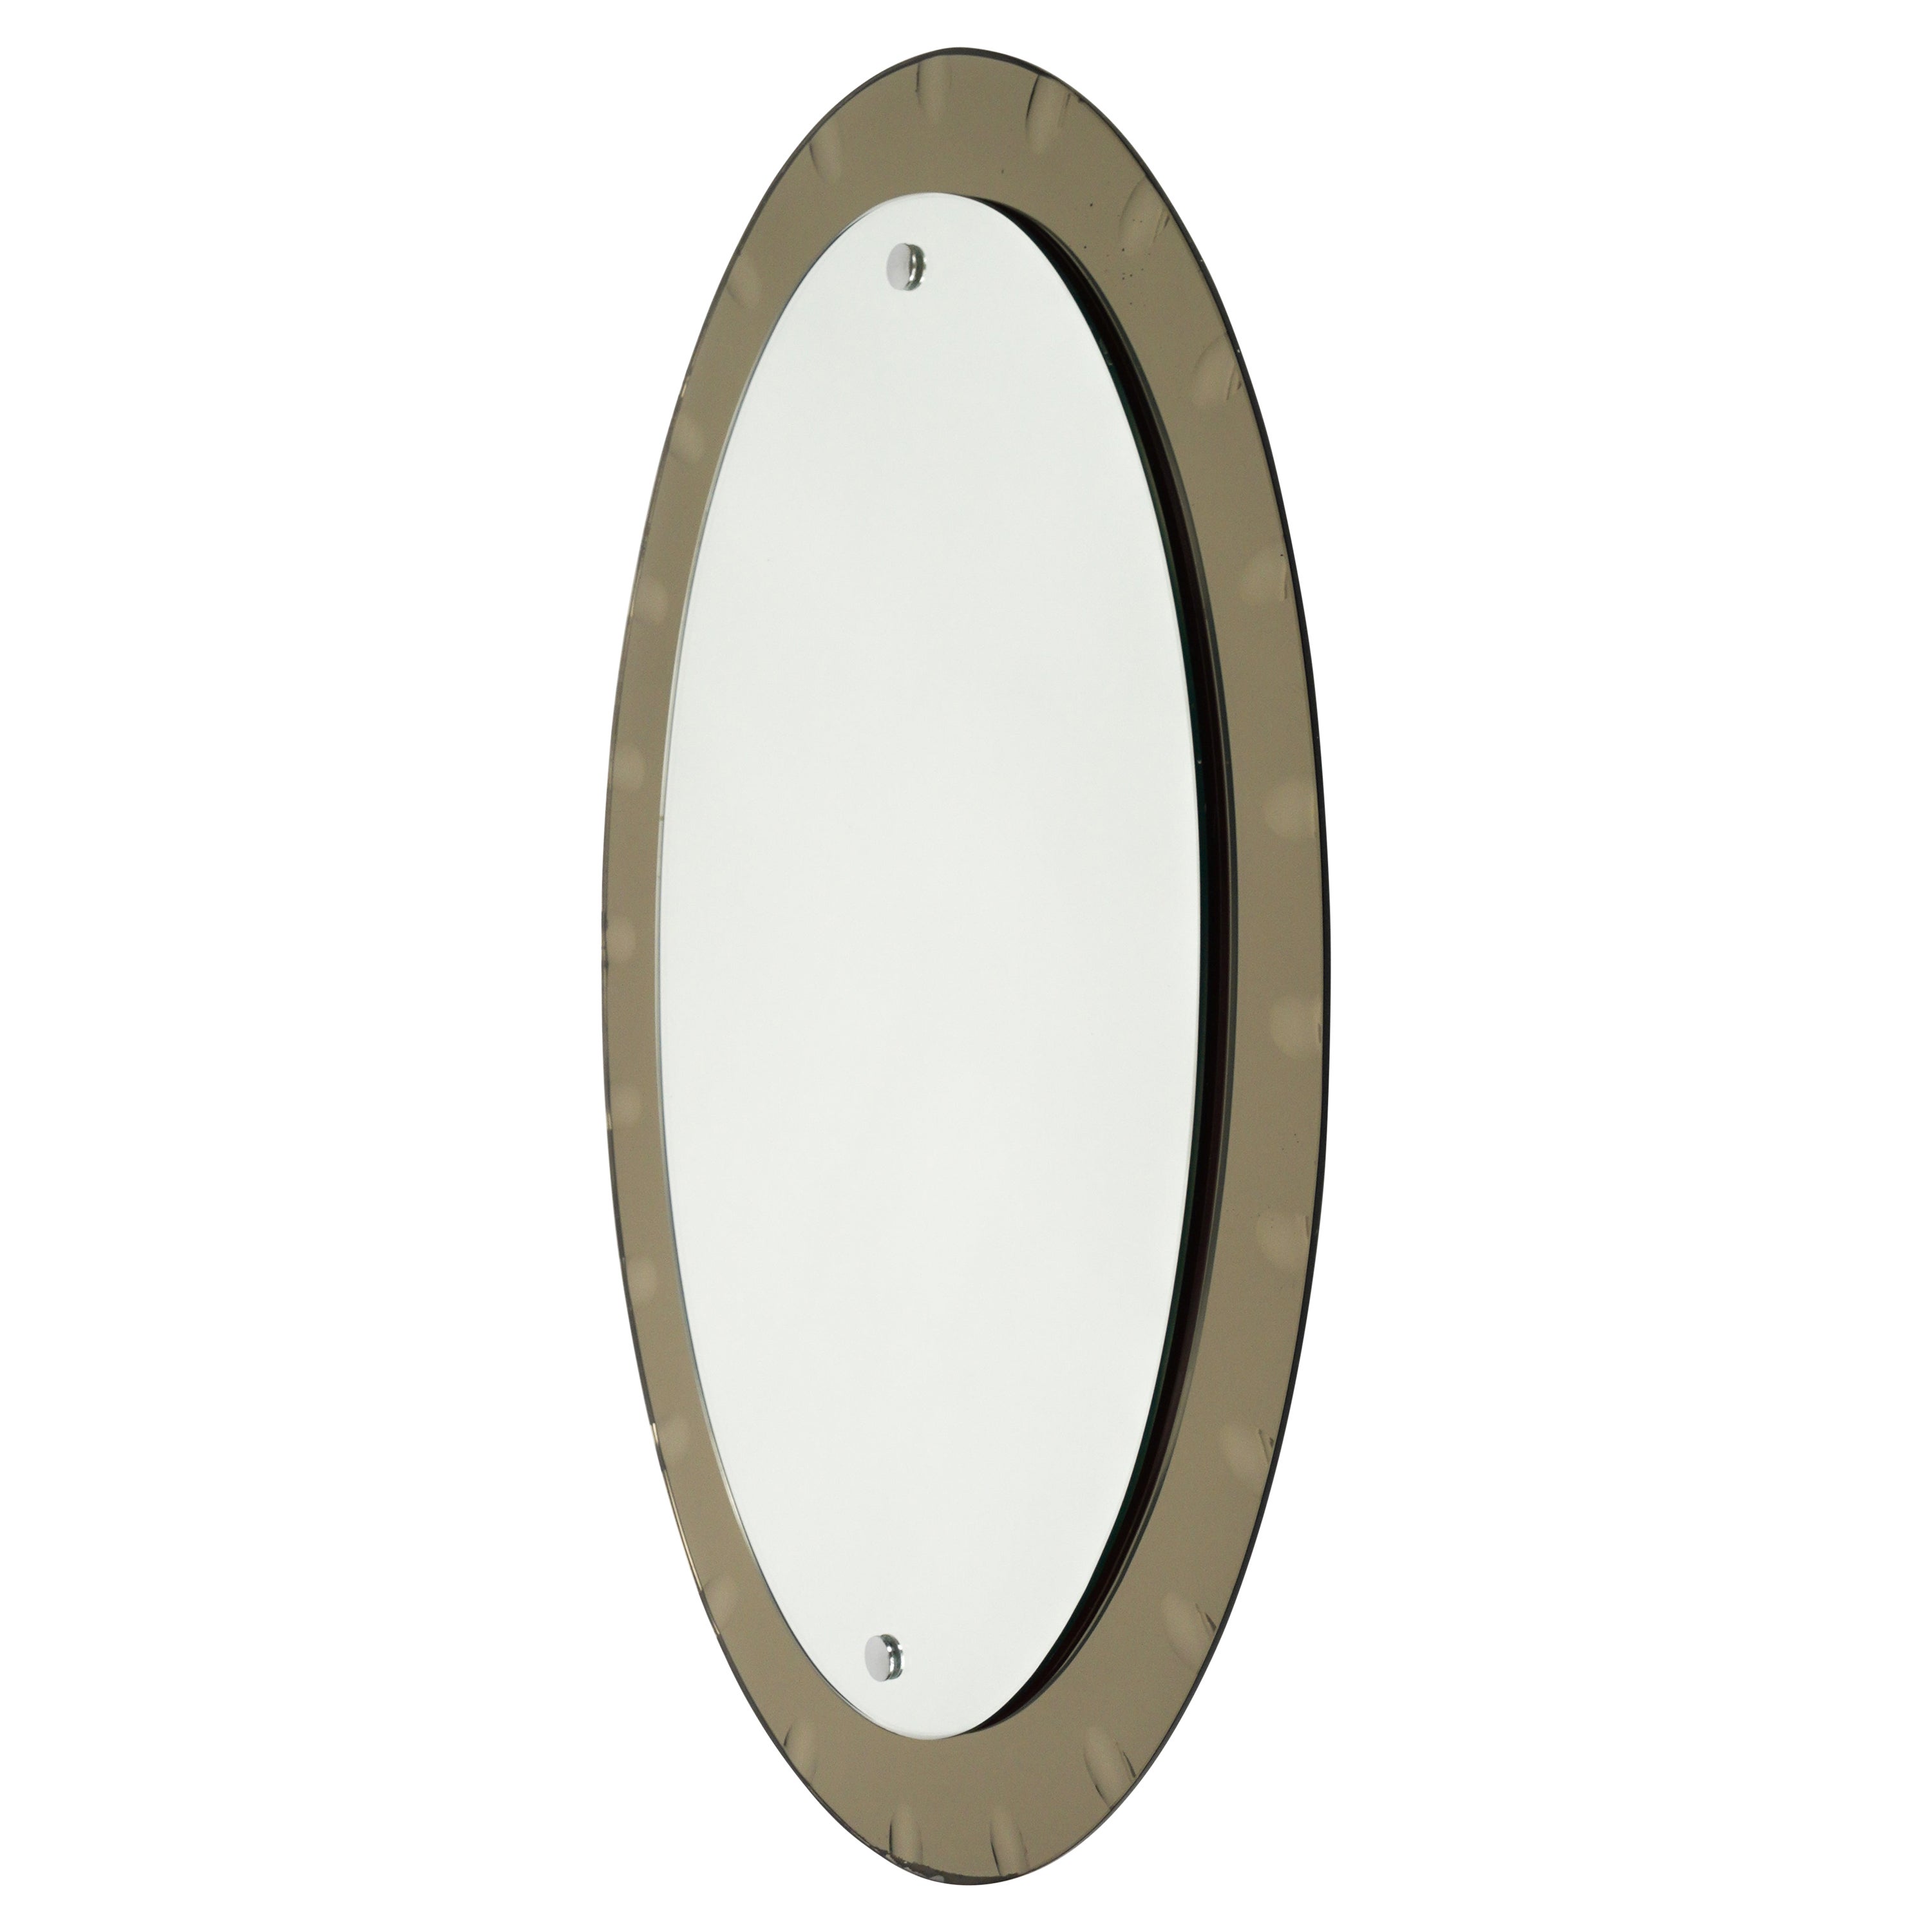 Midcentury Oval Wall Mirror with Bronzed Frame by Cristal Arte, Italy 1960s For Sale